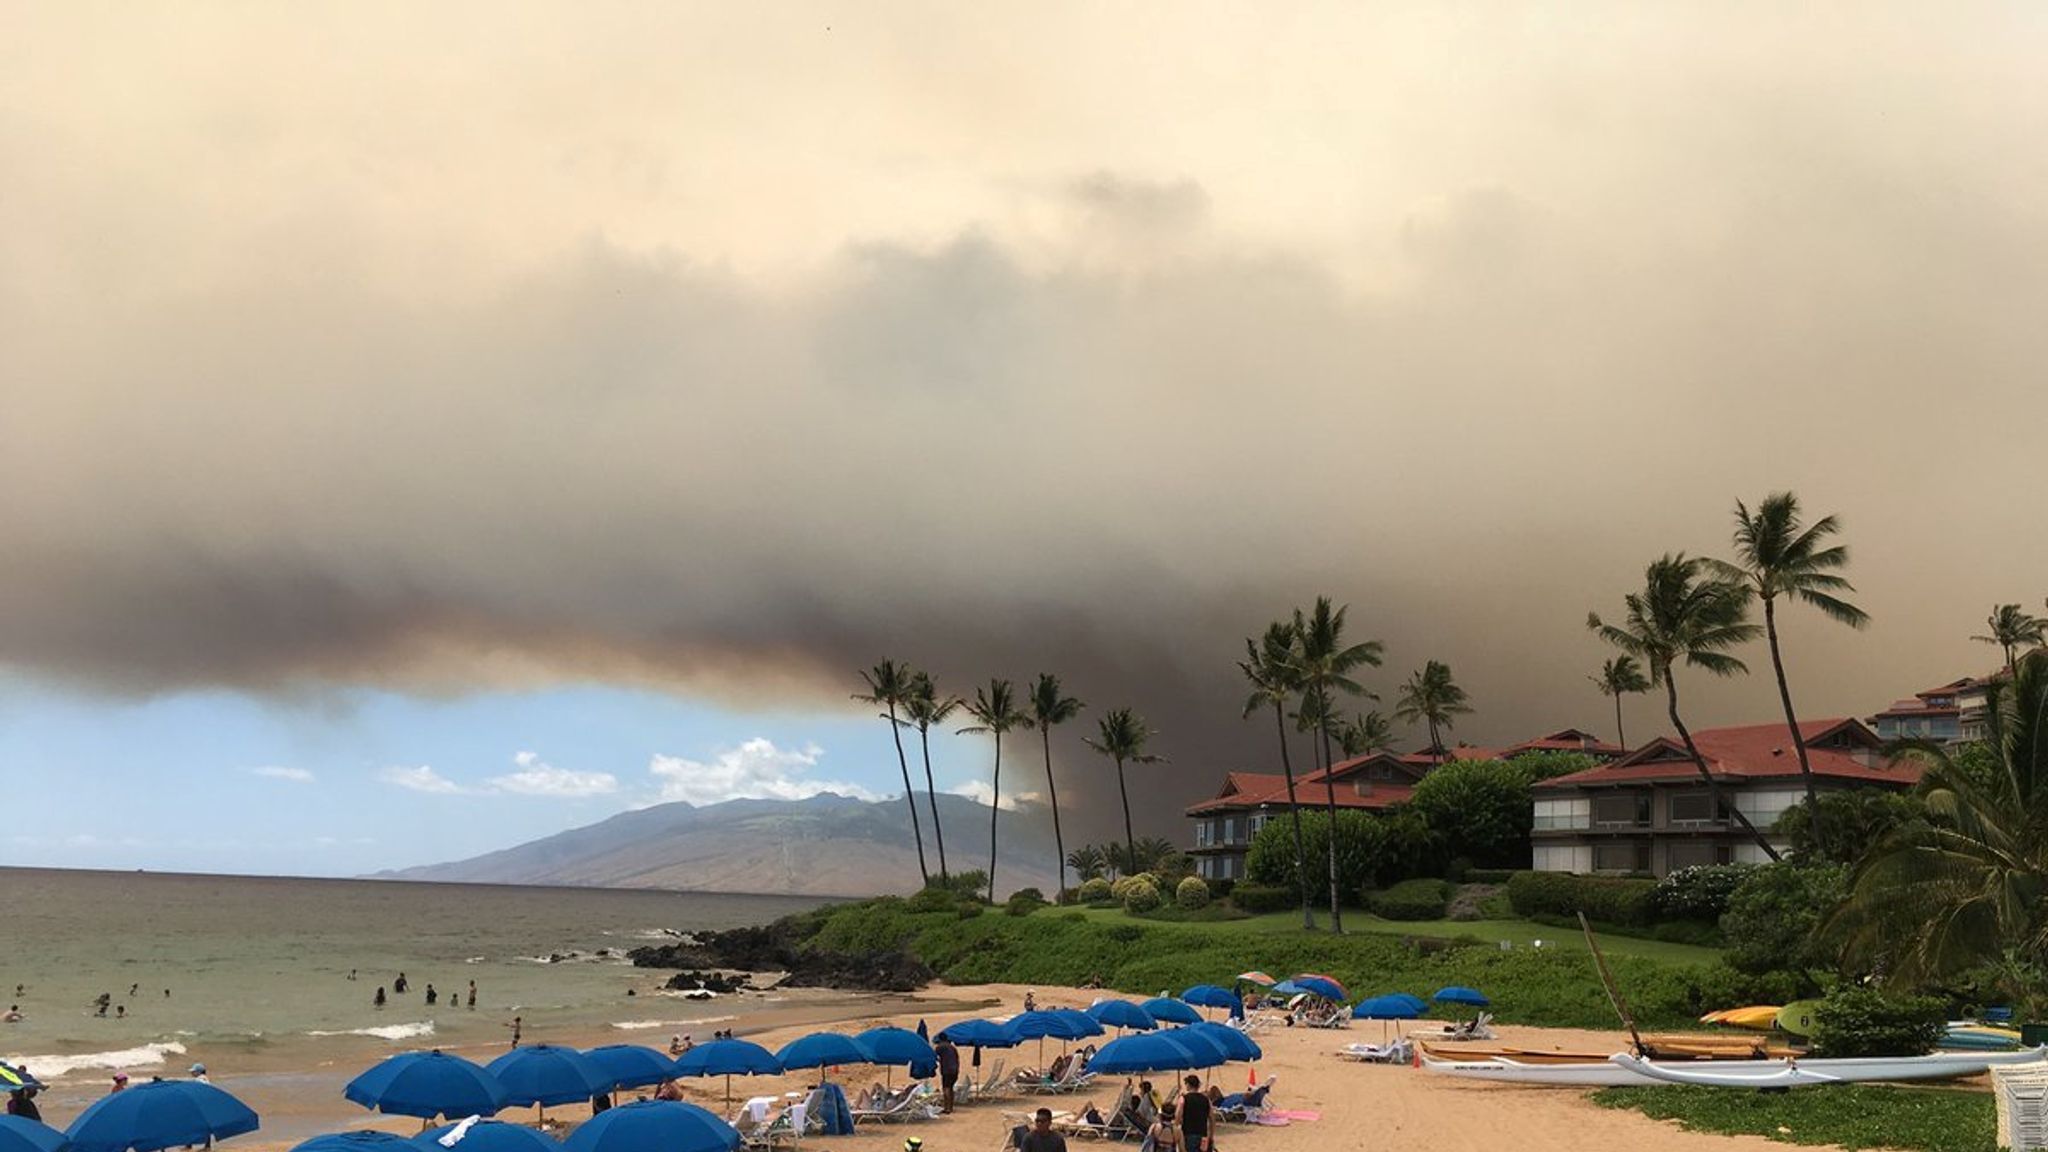 Hawaii State of emergency on Maui island as thousands flee wildfires